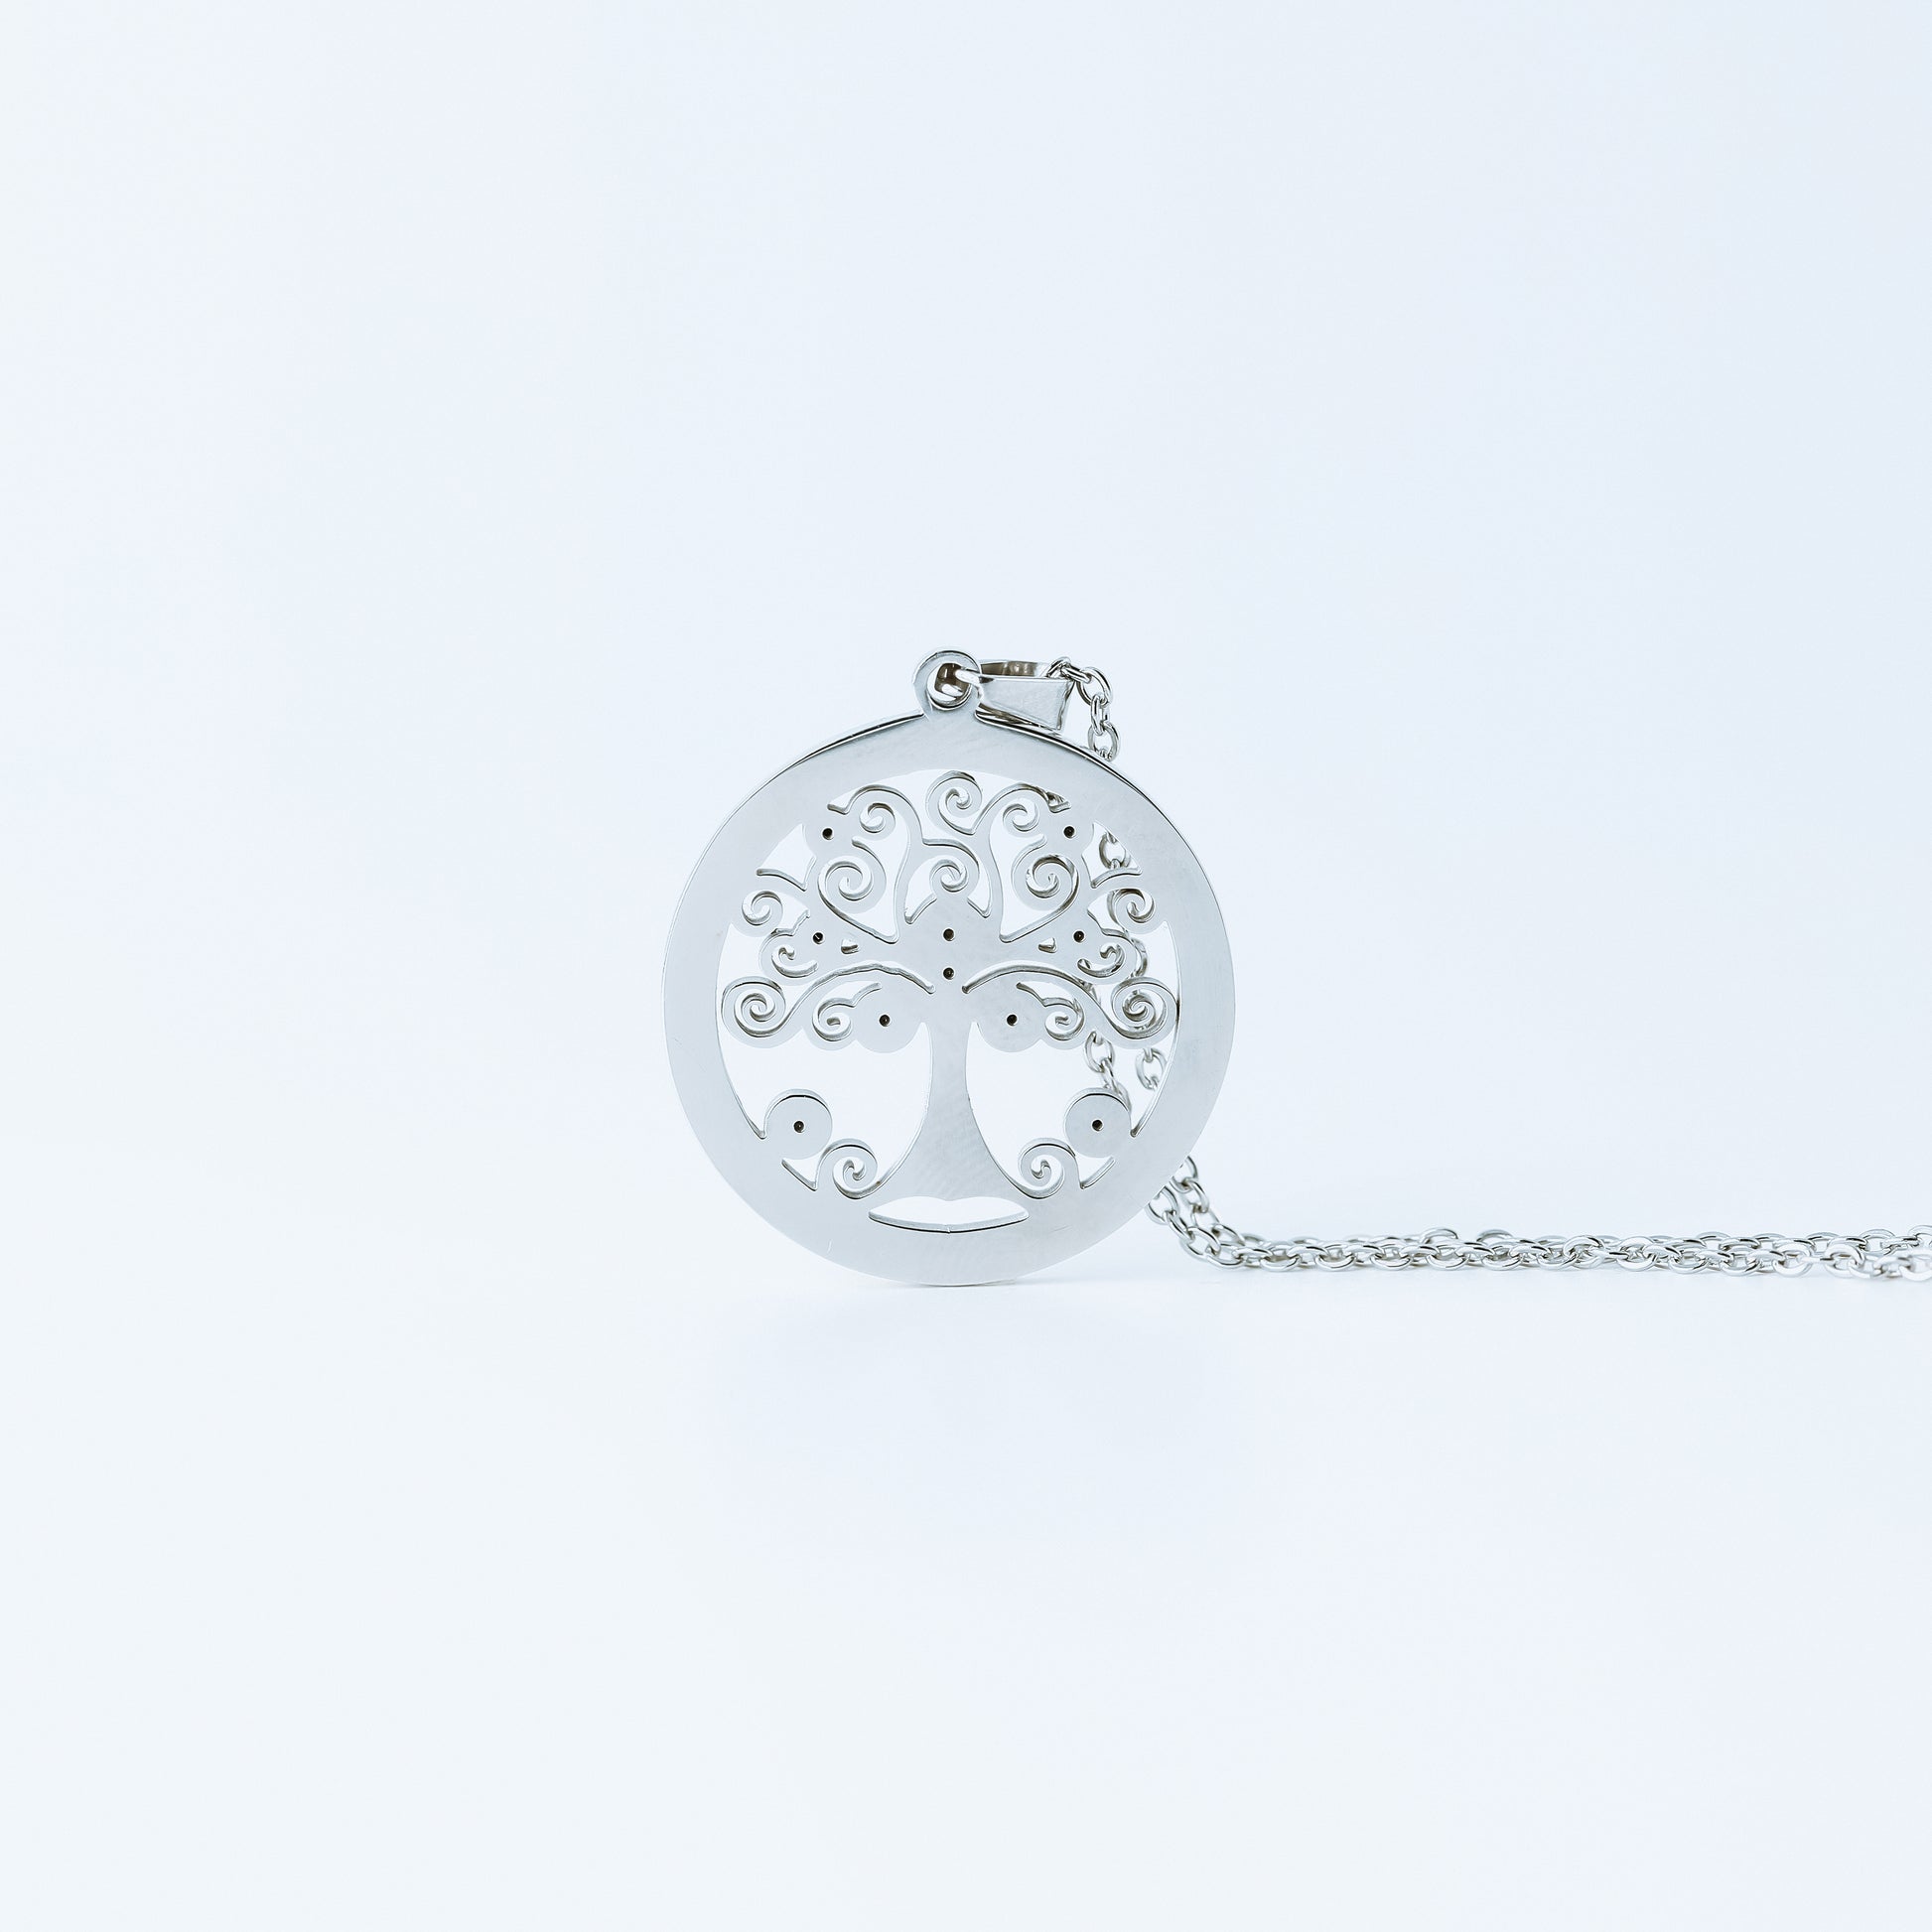 Dainty Tree of Life Necklace • Stainless Steel Family Tree Pendant • Family Tree Jewelry for Her, Arbre de Vie • Gift For Mom and Grandma